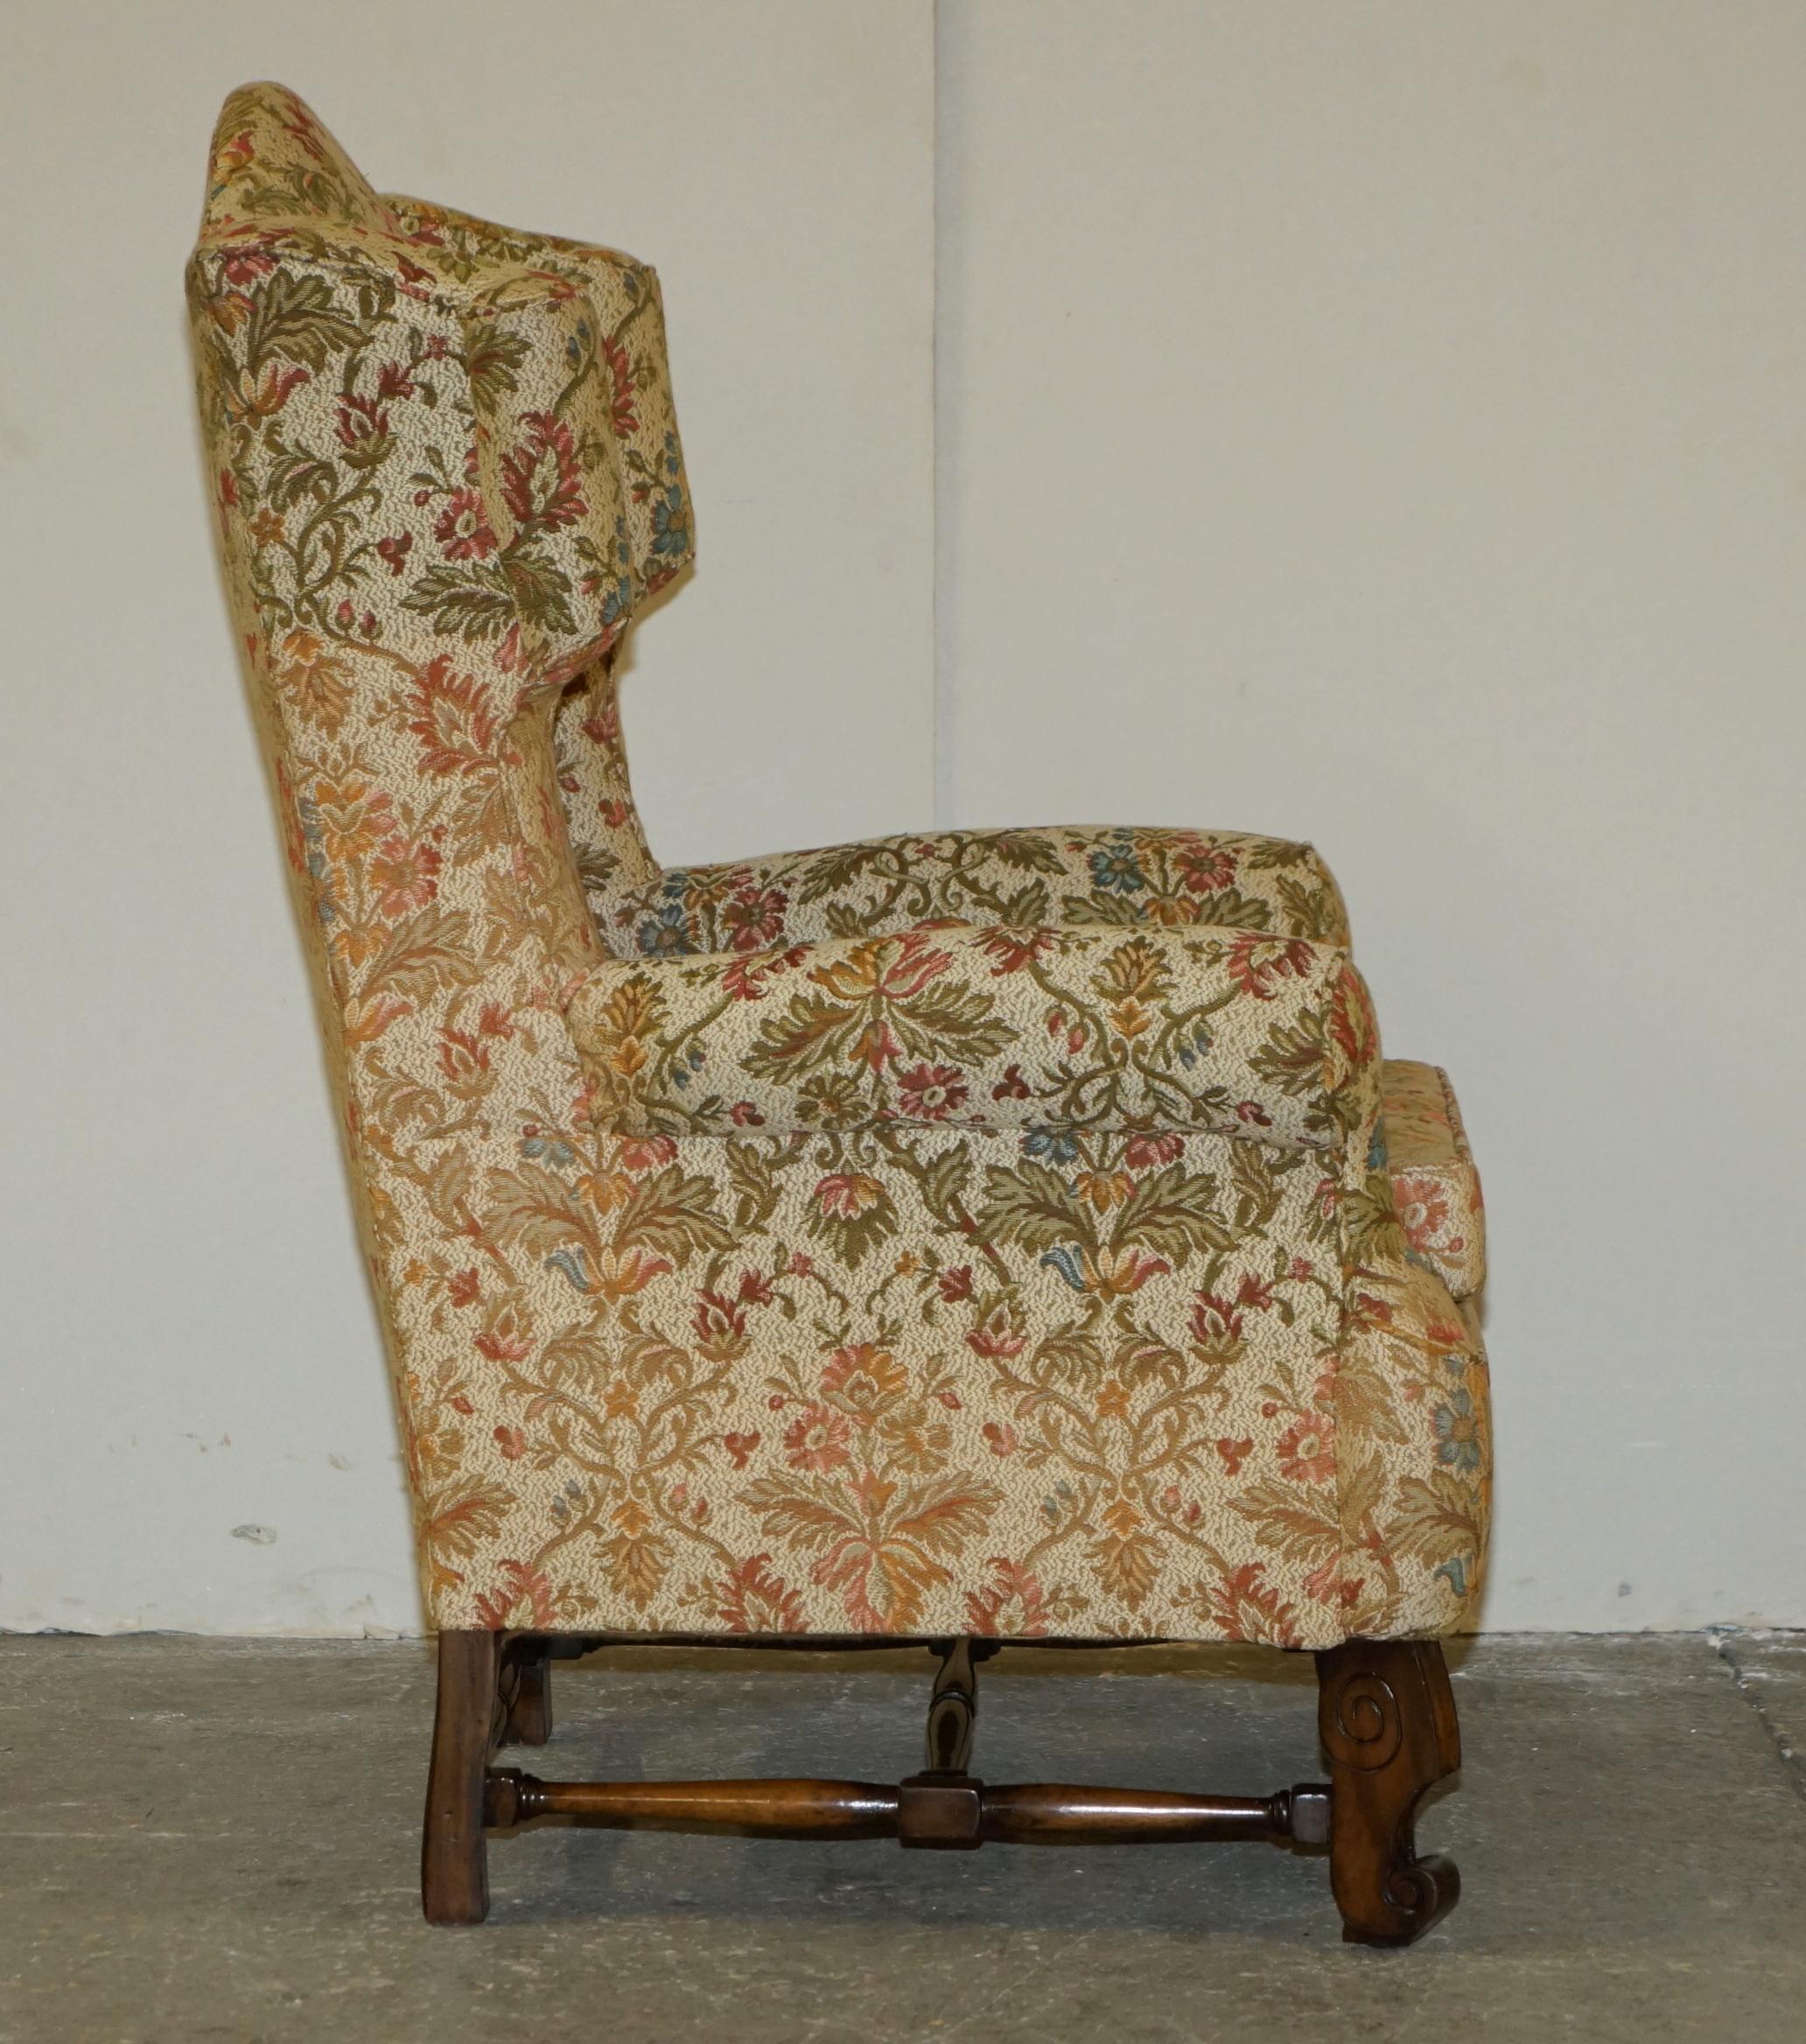 PAIR OF ANTIQUE ITALIAN CAROLEAN HIGH BACK WiNGBACK ARMCHAIRS FOR UPHOLSTERY For Sale 5